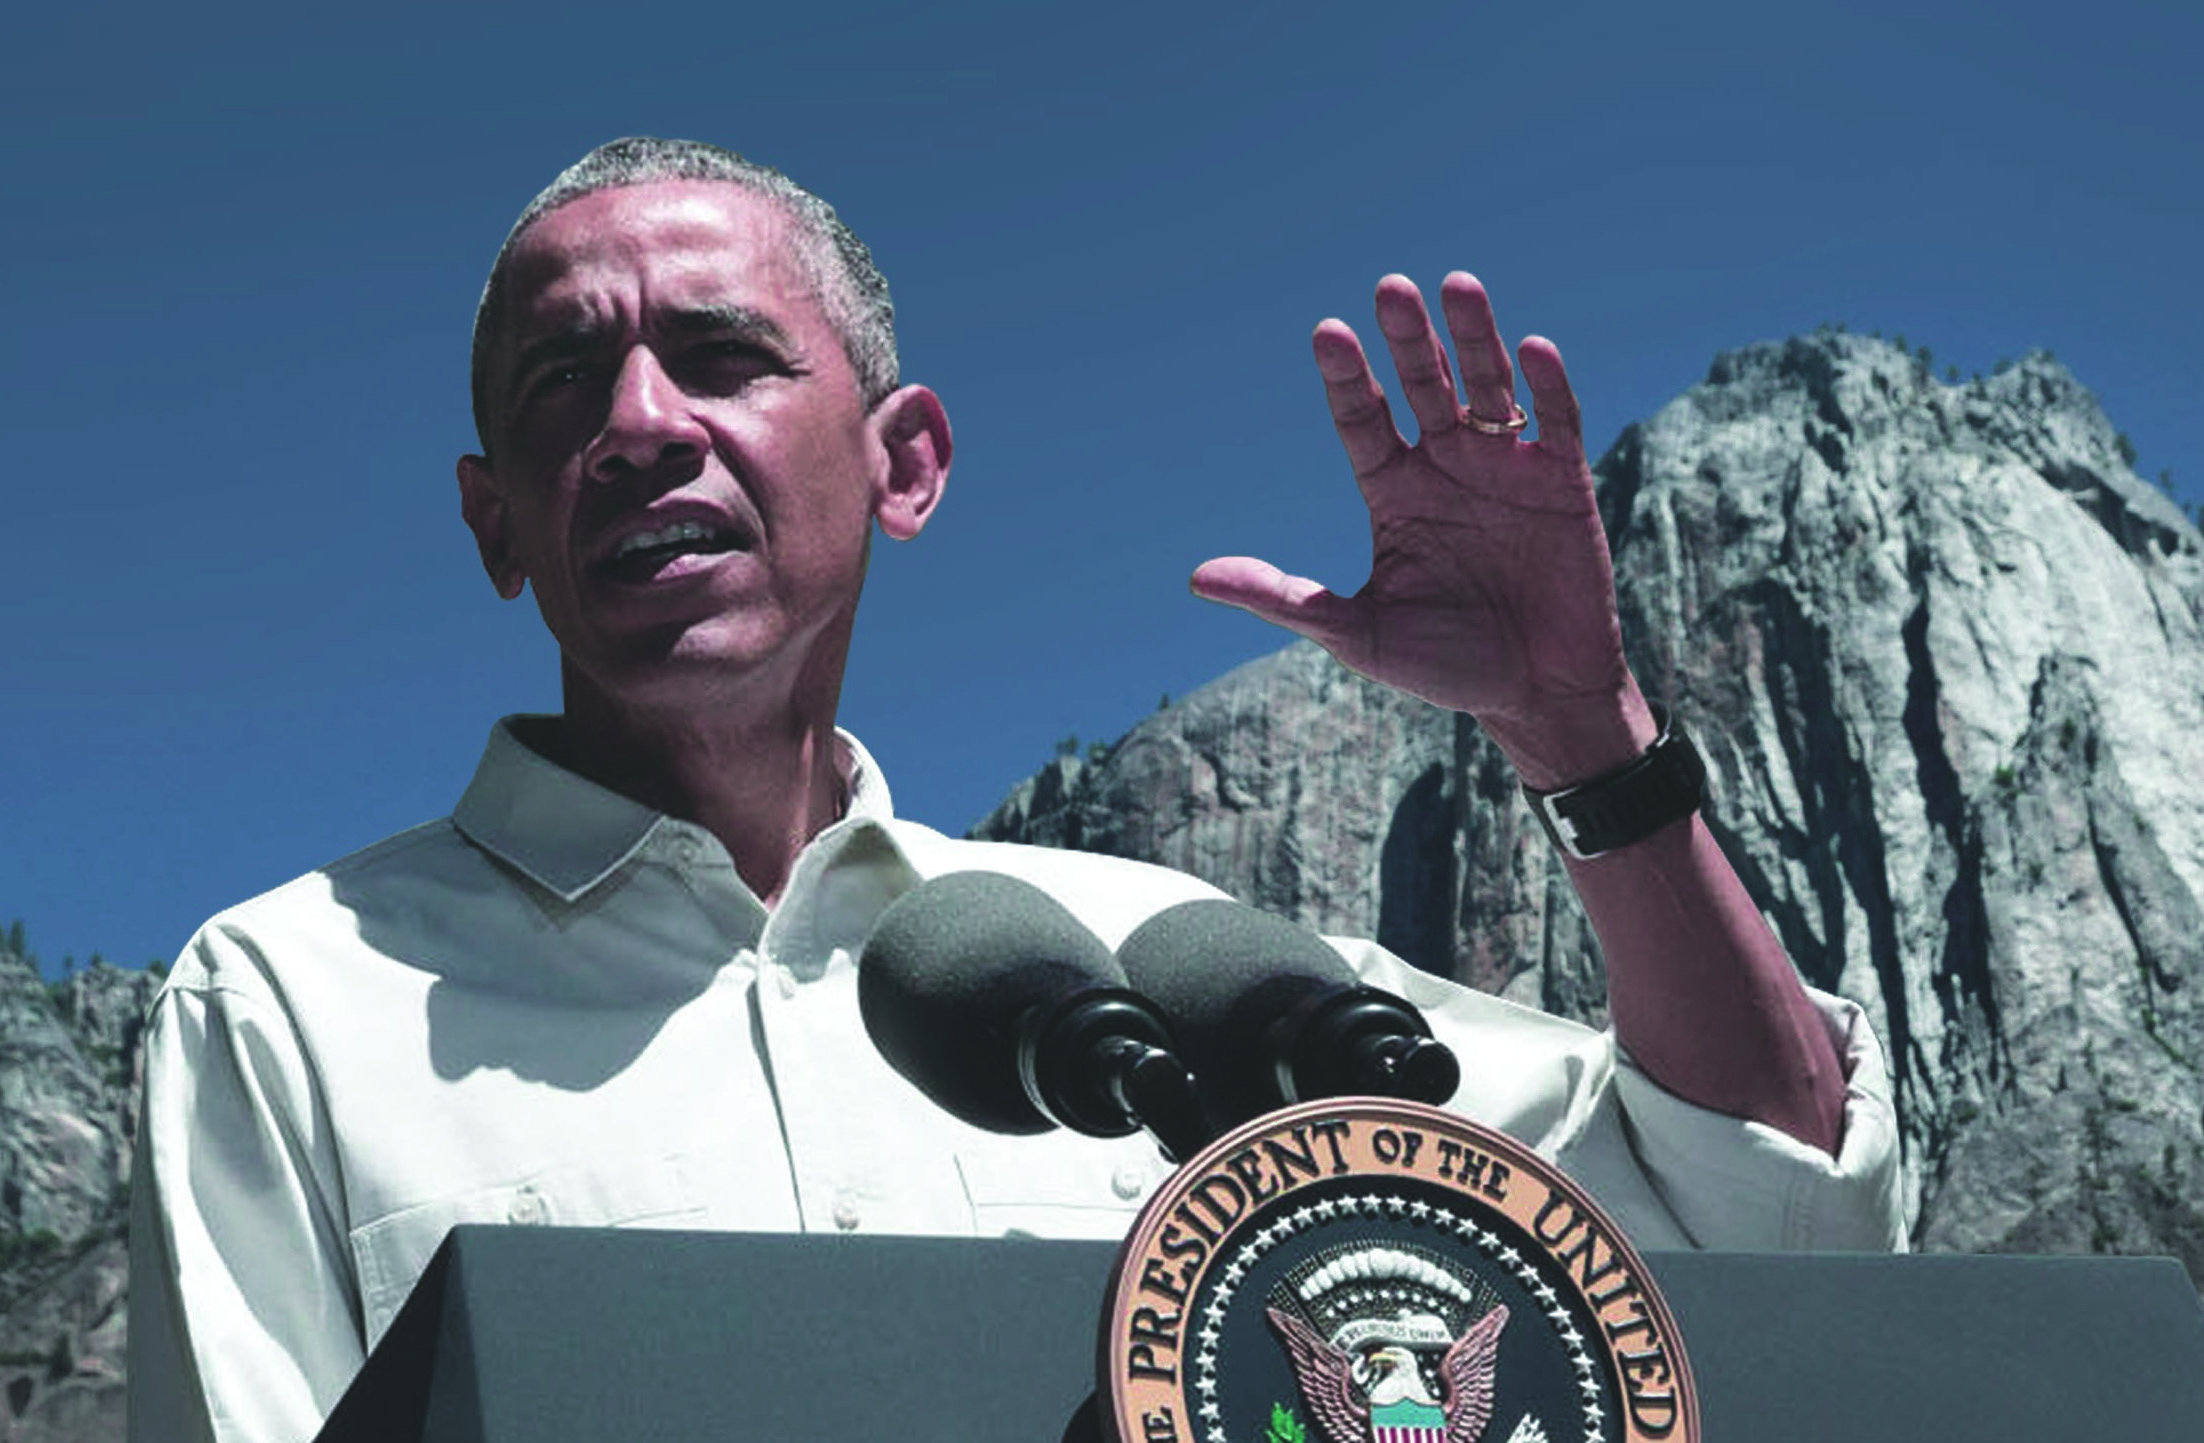 US National Parks Celebrate Centenary with VR 360 Guided Tour by President Obama